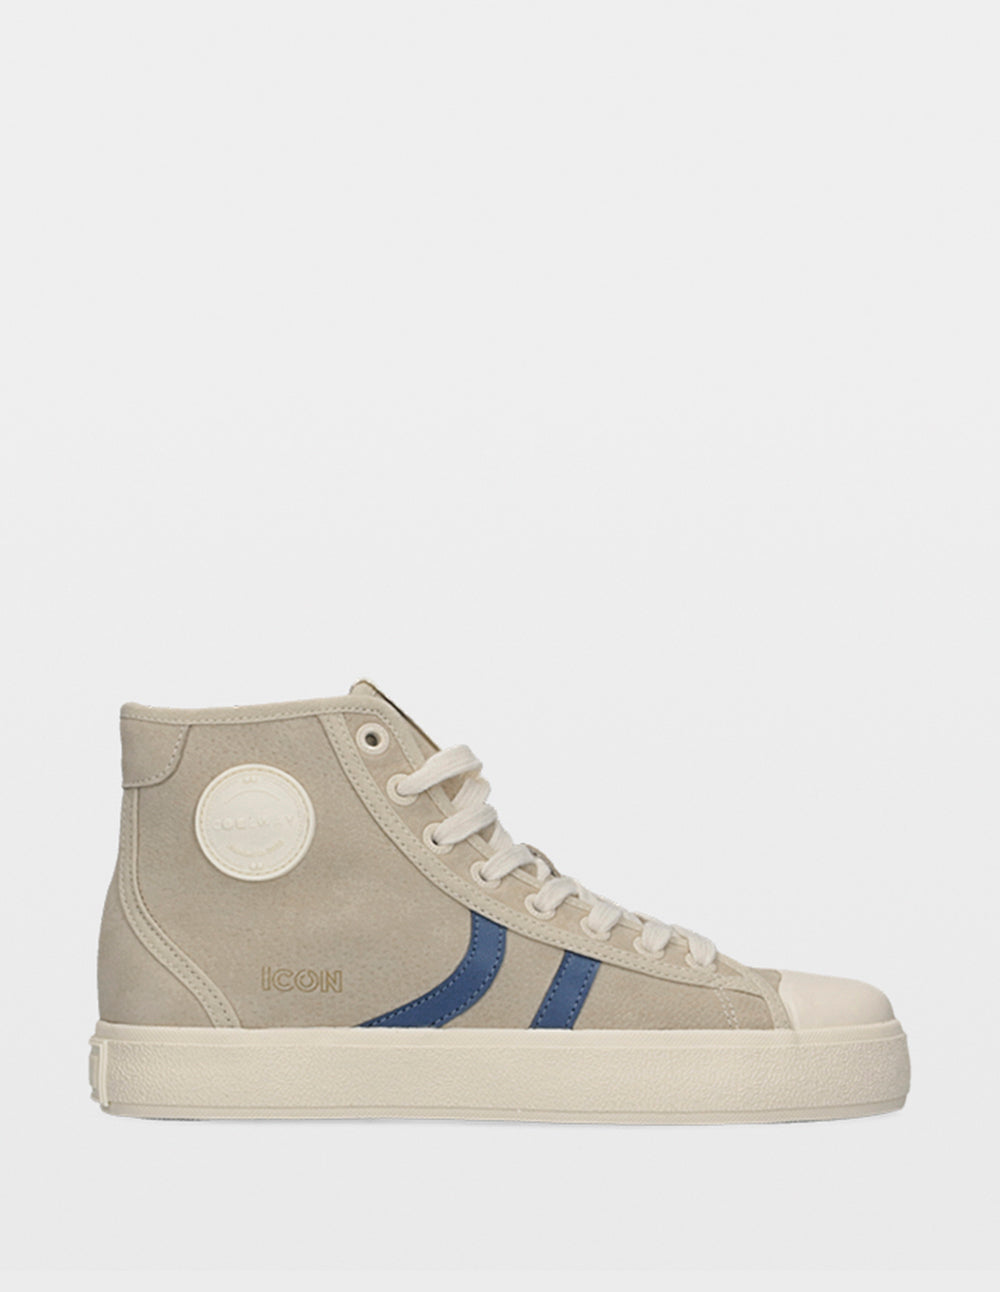 ICON-HI BEIGE/BLUE LEATHER MUJER